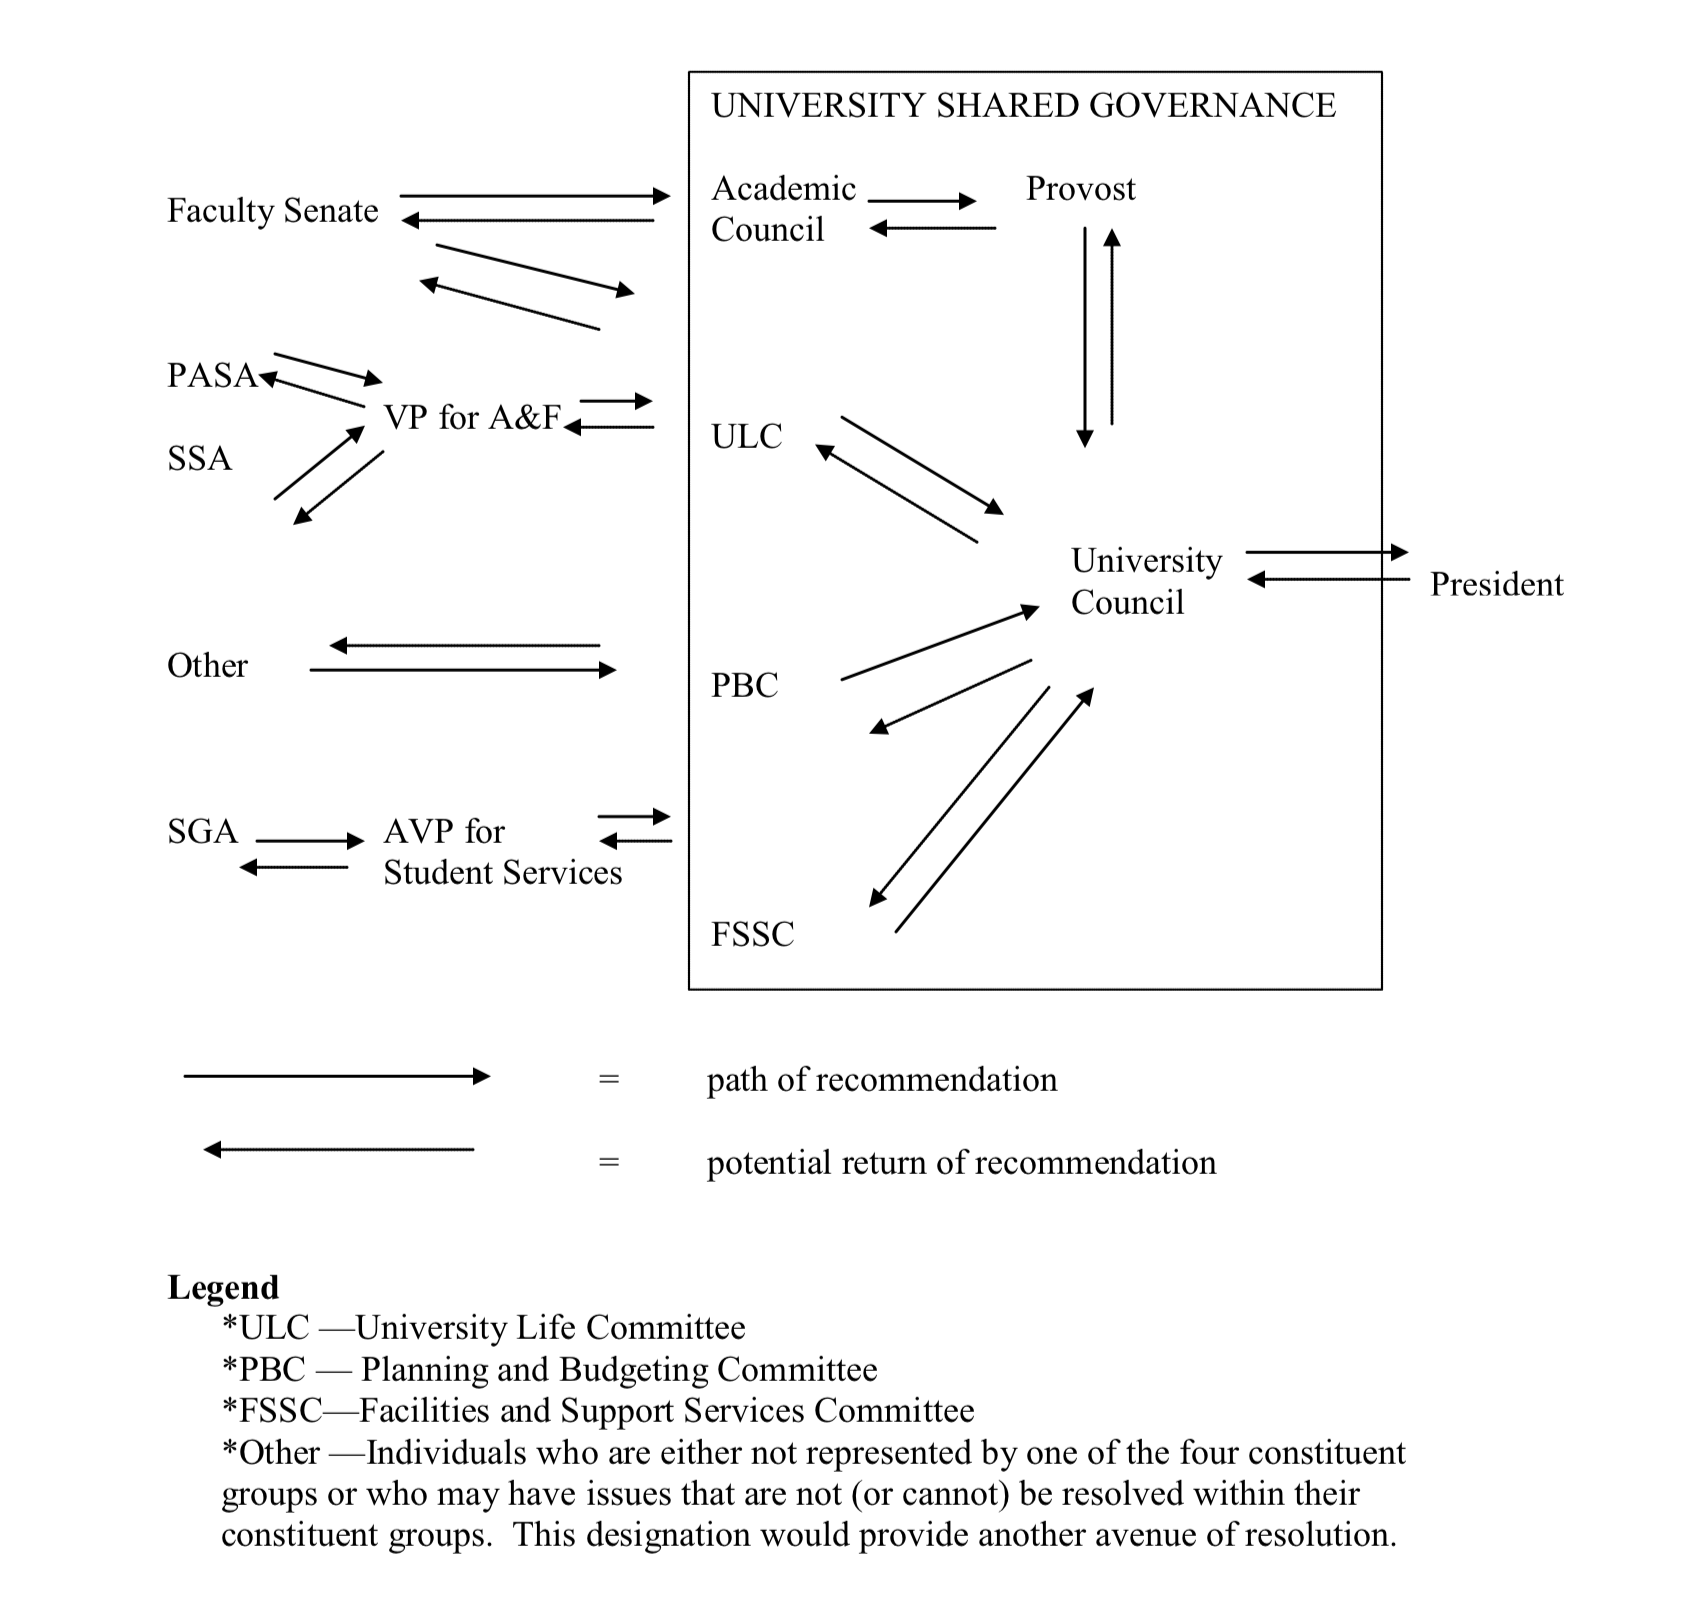 GRAPHIC: Illustration of the shared governance process utilized by UHCL. Designed as a flowchart, the graphic illustrates the flow of recommendations from the various factions of the shared governance system to the University President and back again. Graphic courtesy of UHCL.